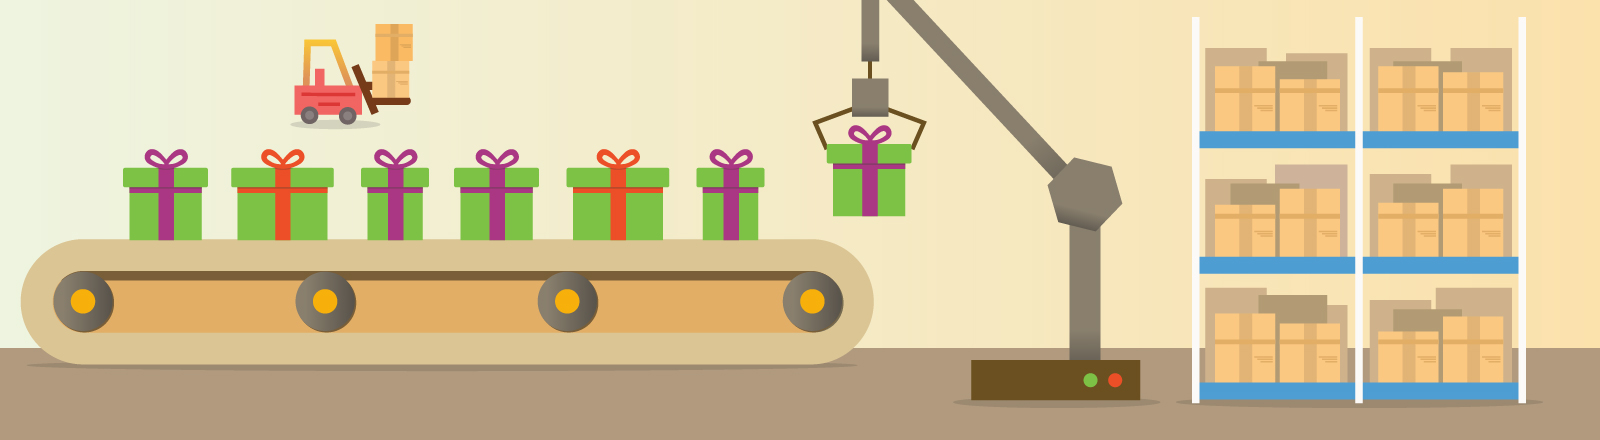 How to finance and manage your holiday inventory in 2022